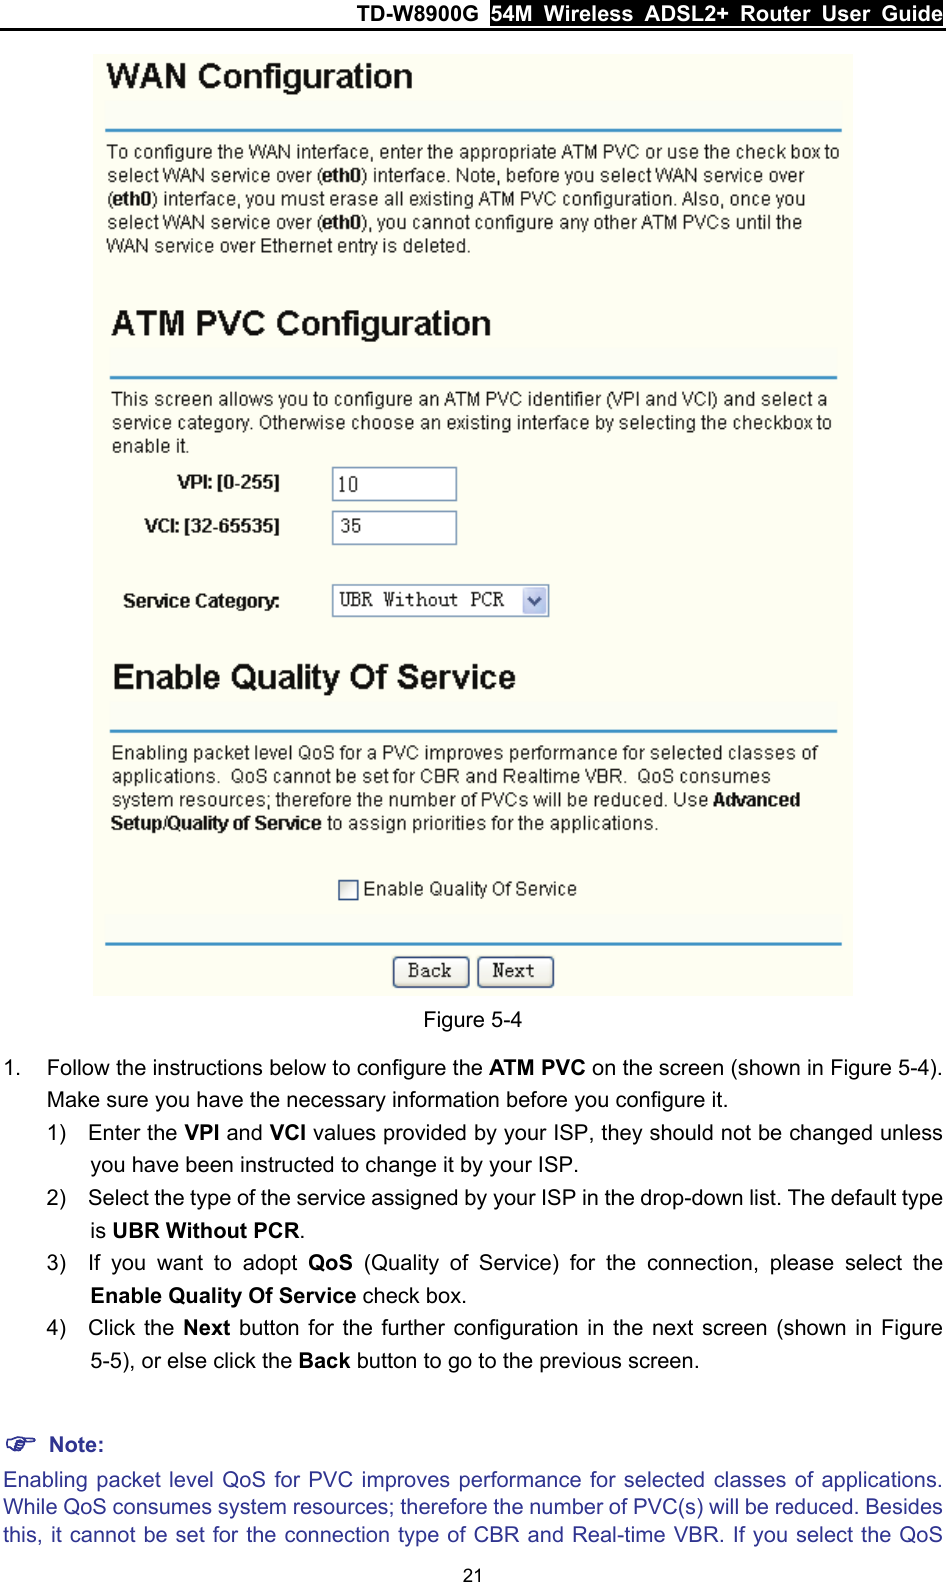 TD-W8900G  54M Wireless ADSL2+ Router User Guide 21  Figure 5-4 1.  Follow the instructions below to configure the ATM PVC on the screen (shown in Figure 5-4). Make sure you have the necessary information before you configure it. 1) Enter the VPI and VCI values provided by your ISP, they should not be changed unless you have been instructed to change it by your ISP. 2)  Select the type of the service assigned by your ISP in the drop-down list. The default type is UBR Without PCR. 3)  If you want to adopt QoS (Quality of Service) for the connection, please select the Enable Quality Of Service check box. 4) Click the Next button for the further configuration in the next screen (shown in Figure 5-5), or else click the Back button to go to the previous screen.  ) Note: Enabling packet level QoS for PVC improves performance for selected classes of applications. While QoS consumes system resources; therefore the number of PVC(s) will be reduced. Besides this, it cannot be set for the connection type of CBR and Real-time VBR. If you select the QoS 